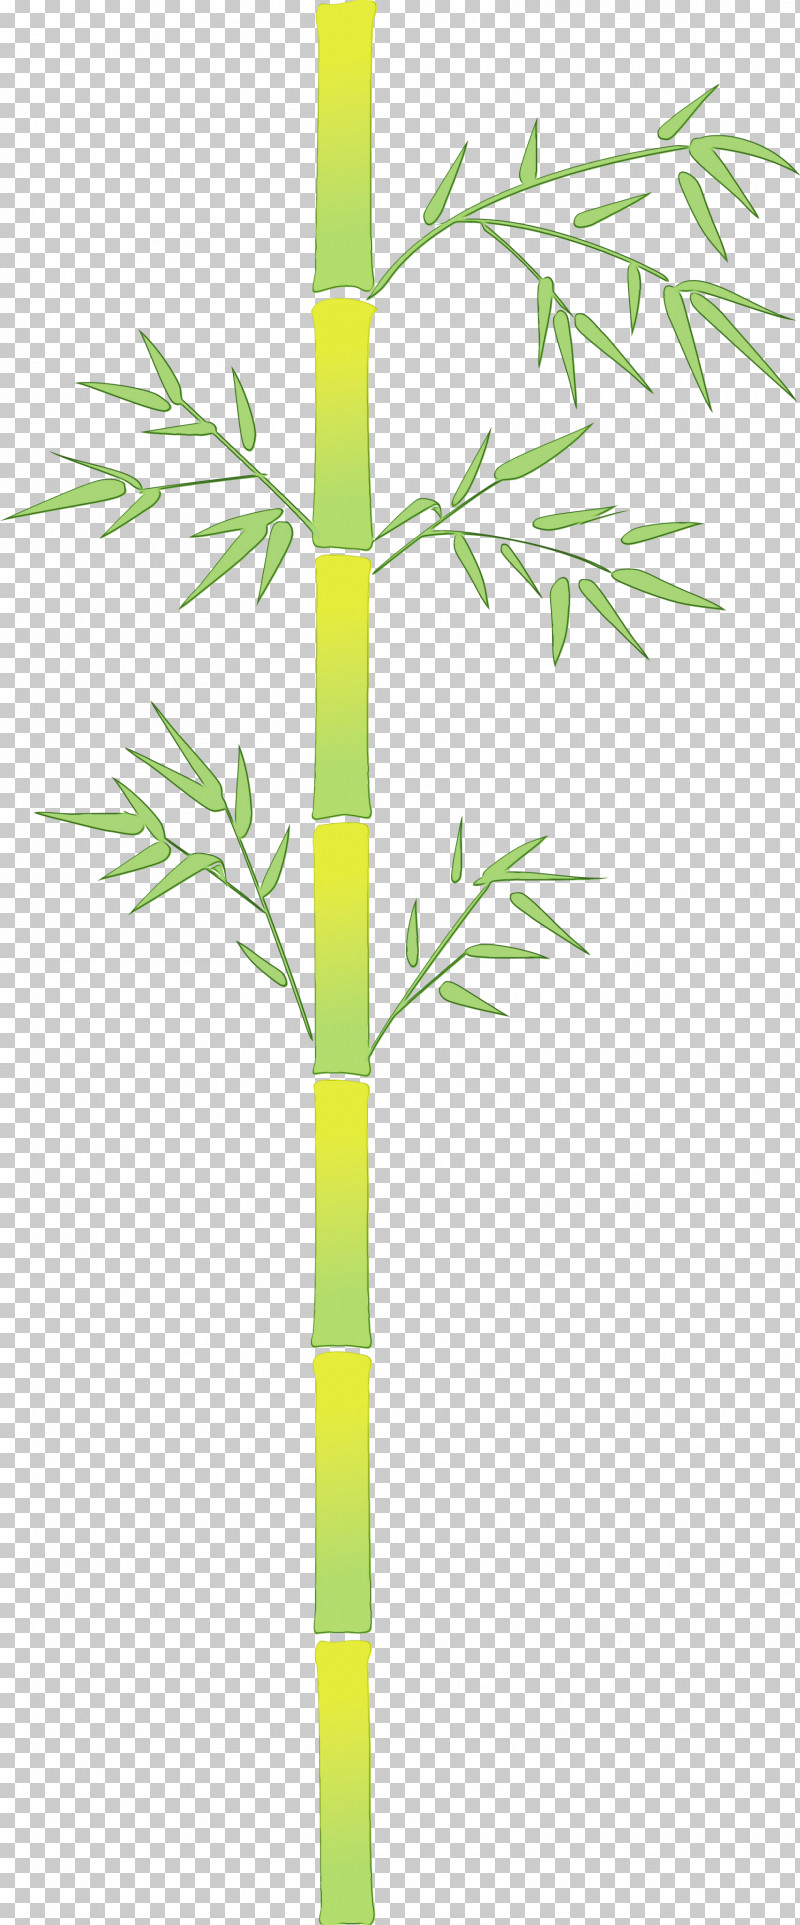 Bamboo Plant Stem Leaf Plant Tree PNG, Clipart, Bamboo, Flower, Grass, Houseplant, Leaf Free PNG Download